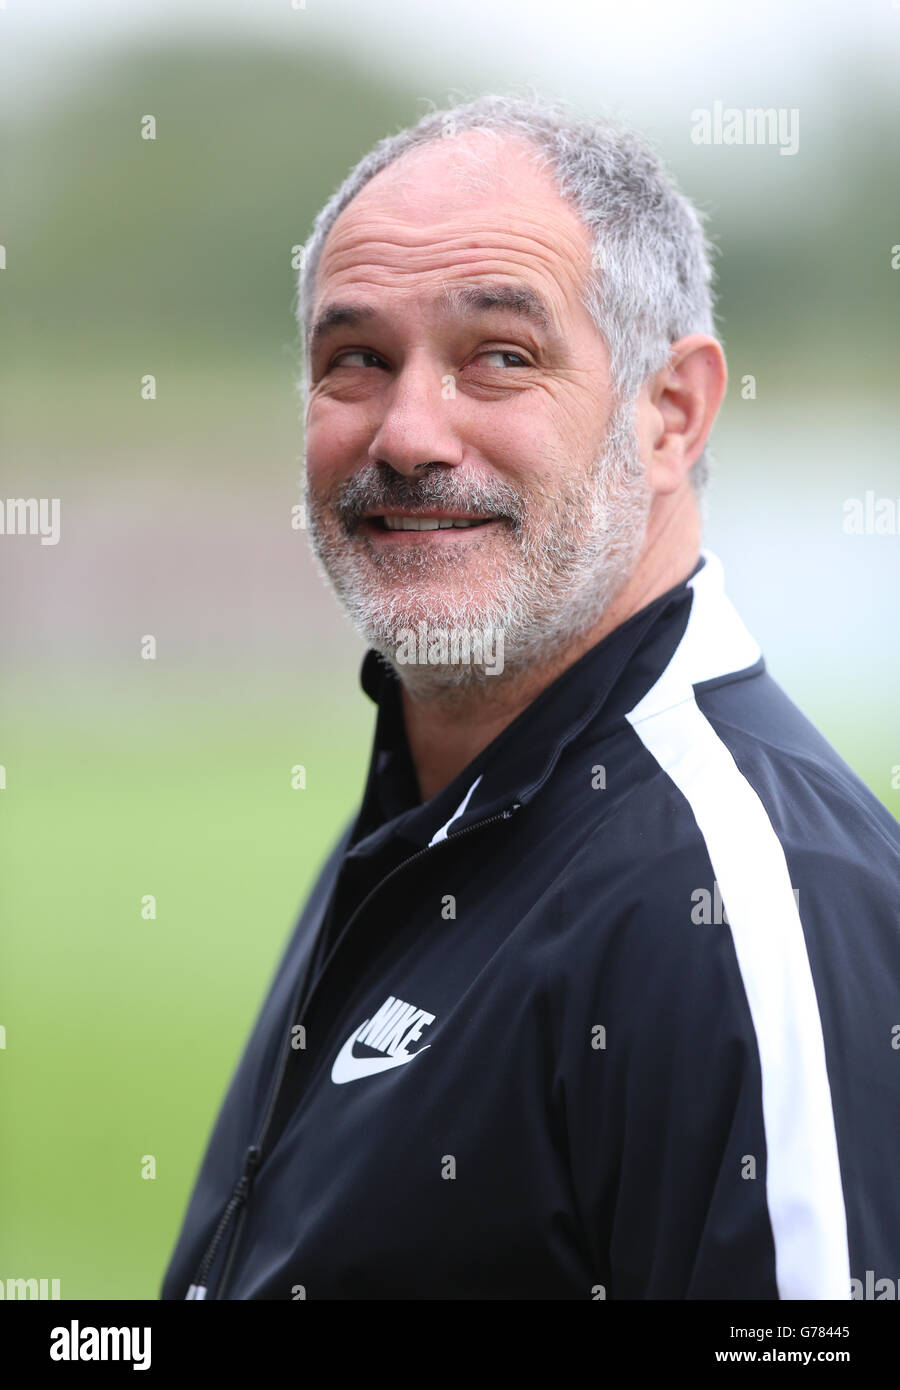 Director of football Andoni Zubizarreta during the training session at St George's Park, Burton-Upon-Trent. Stock Photo